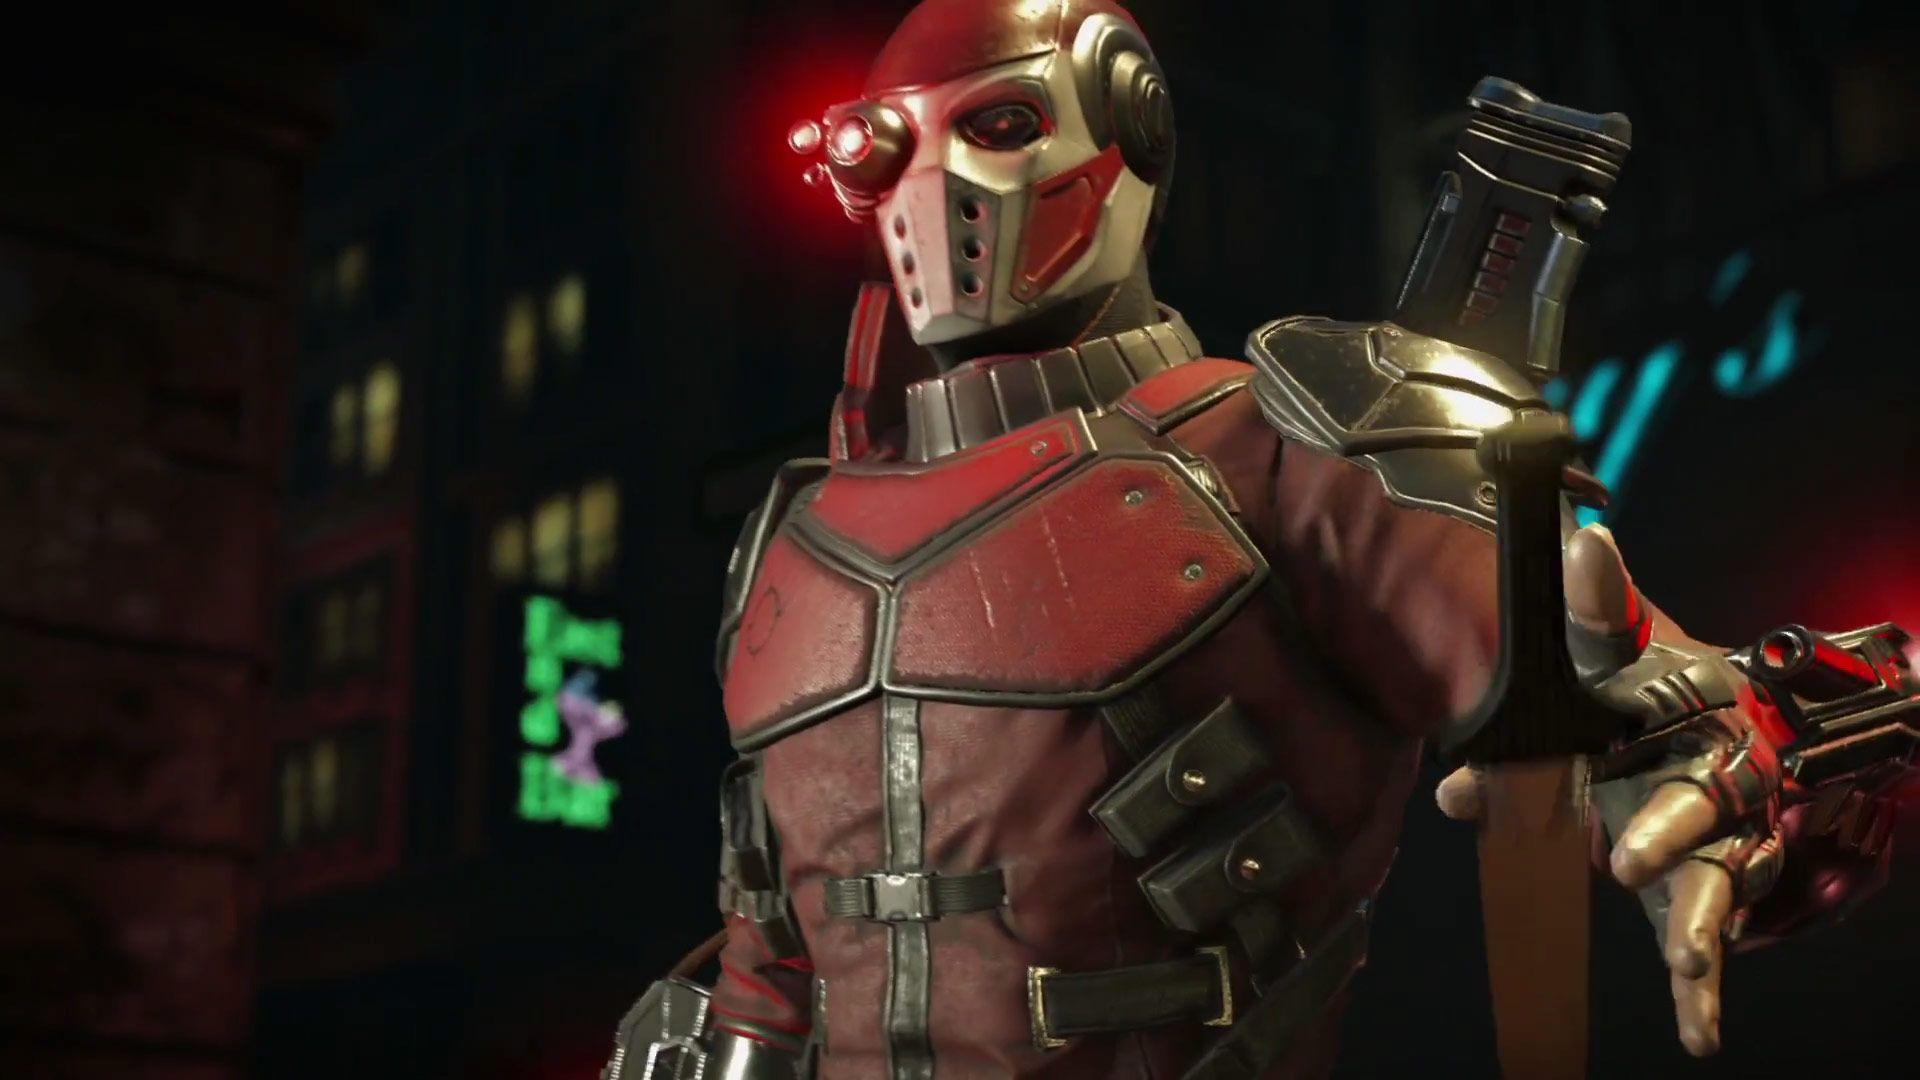 Injustice Harley Quinn and Deadshot Reveal Gallery out of